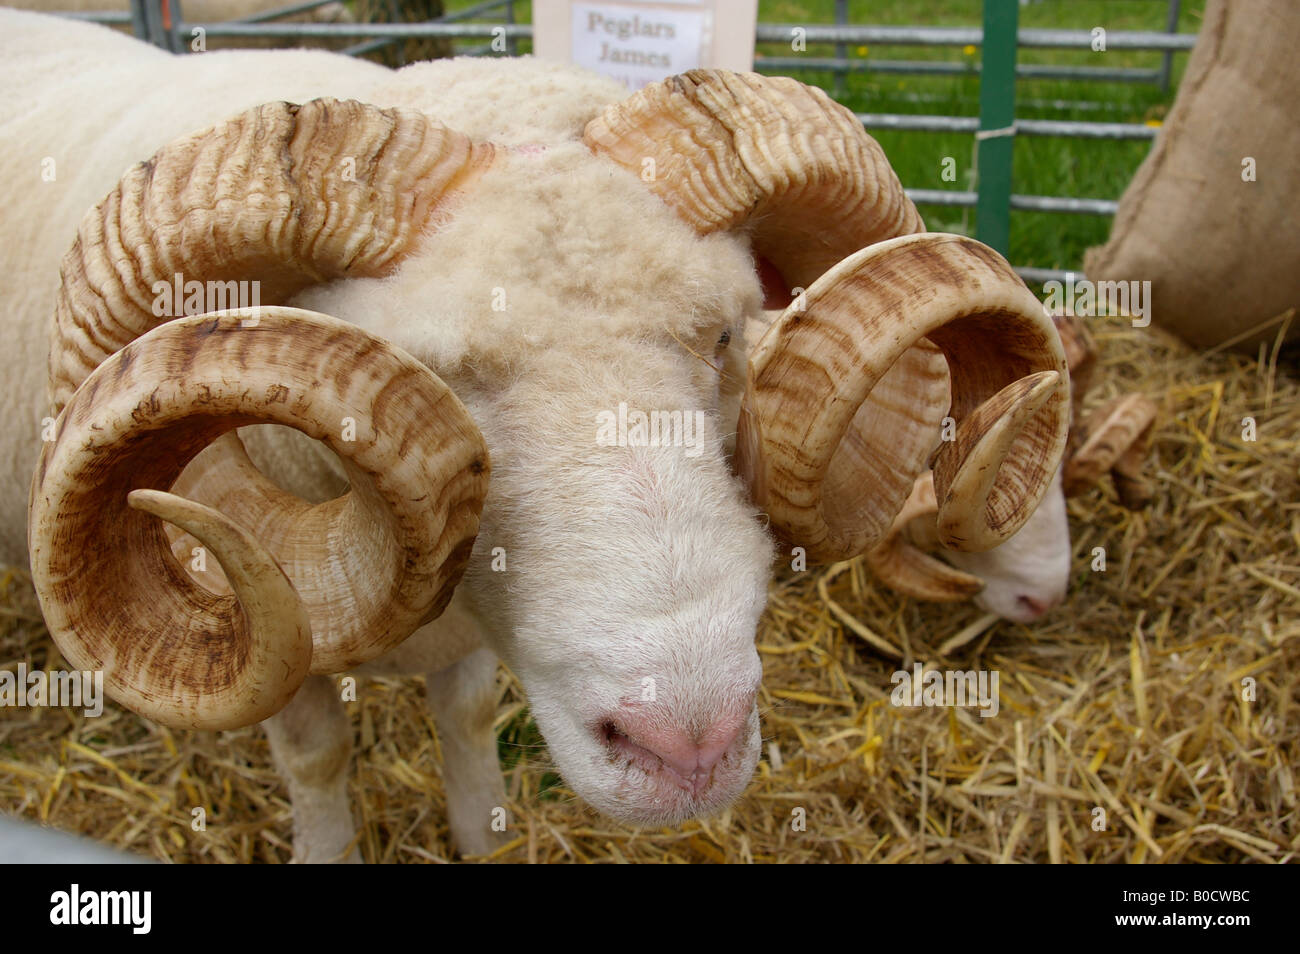 Ram with curly horns Stock Photo